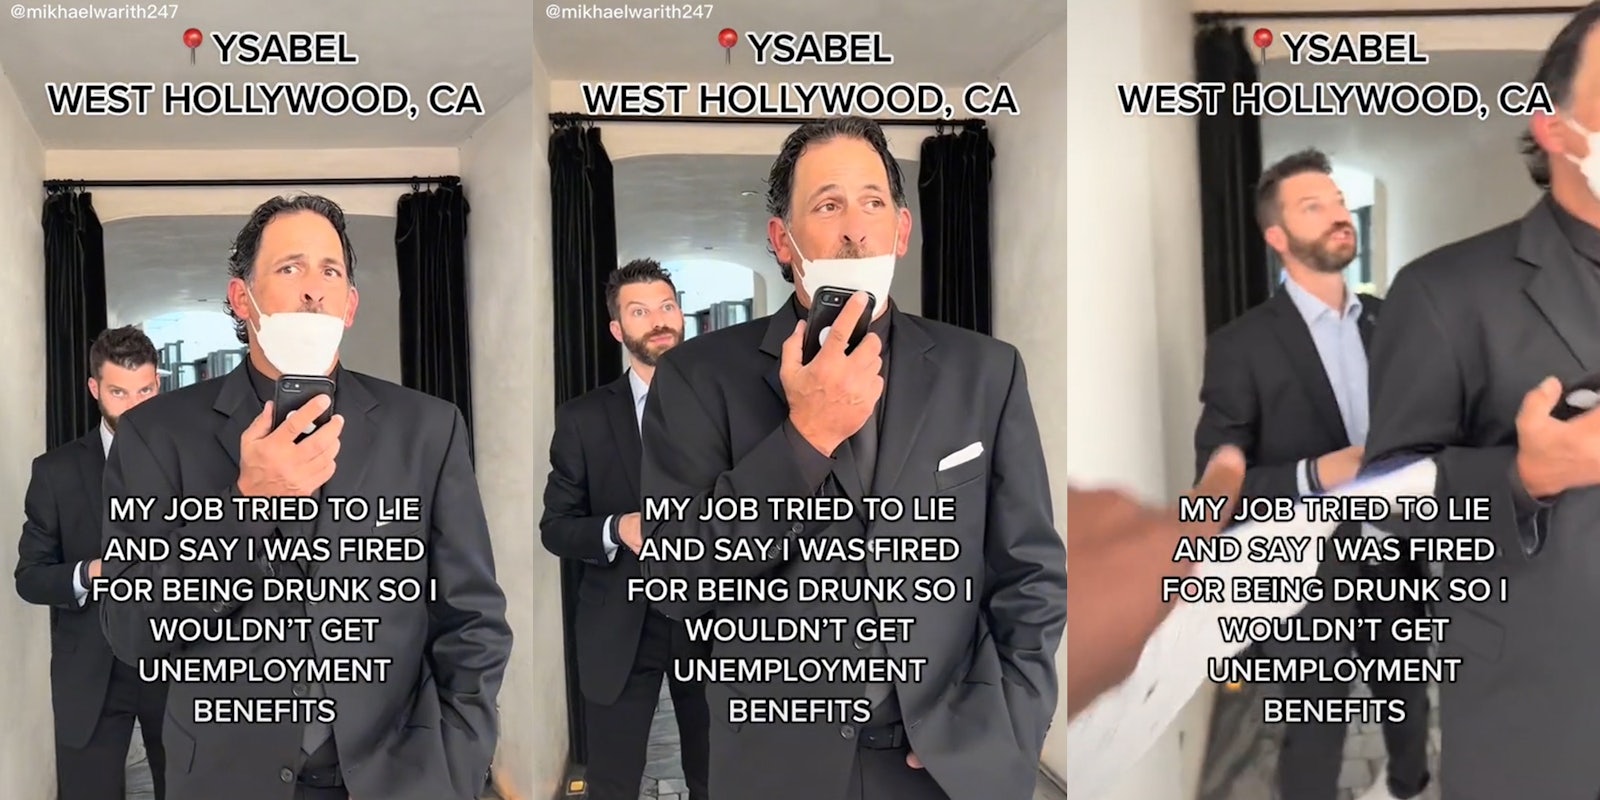 man on phone wearing mask with man behind him reacting, caption 'Ysabel, West Hollywood, CA' and 'My job tried to lie and say i was fired for being drunk so i wouldn't get unemployment benefits'